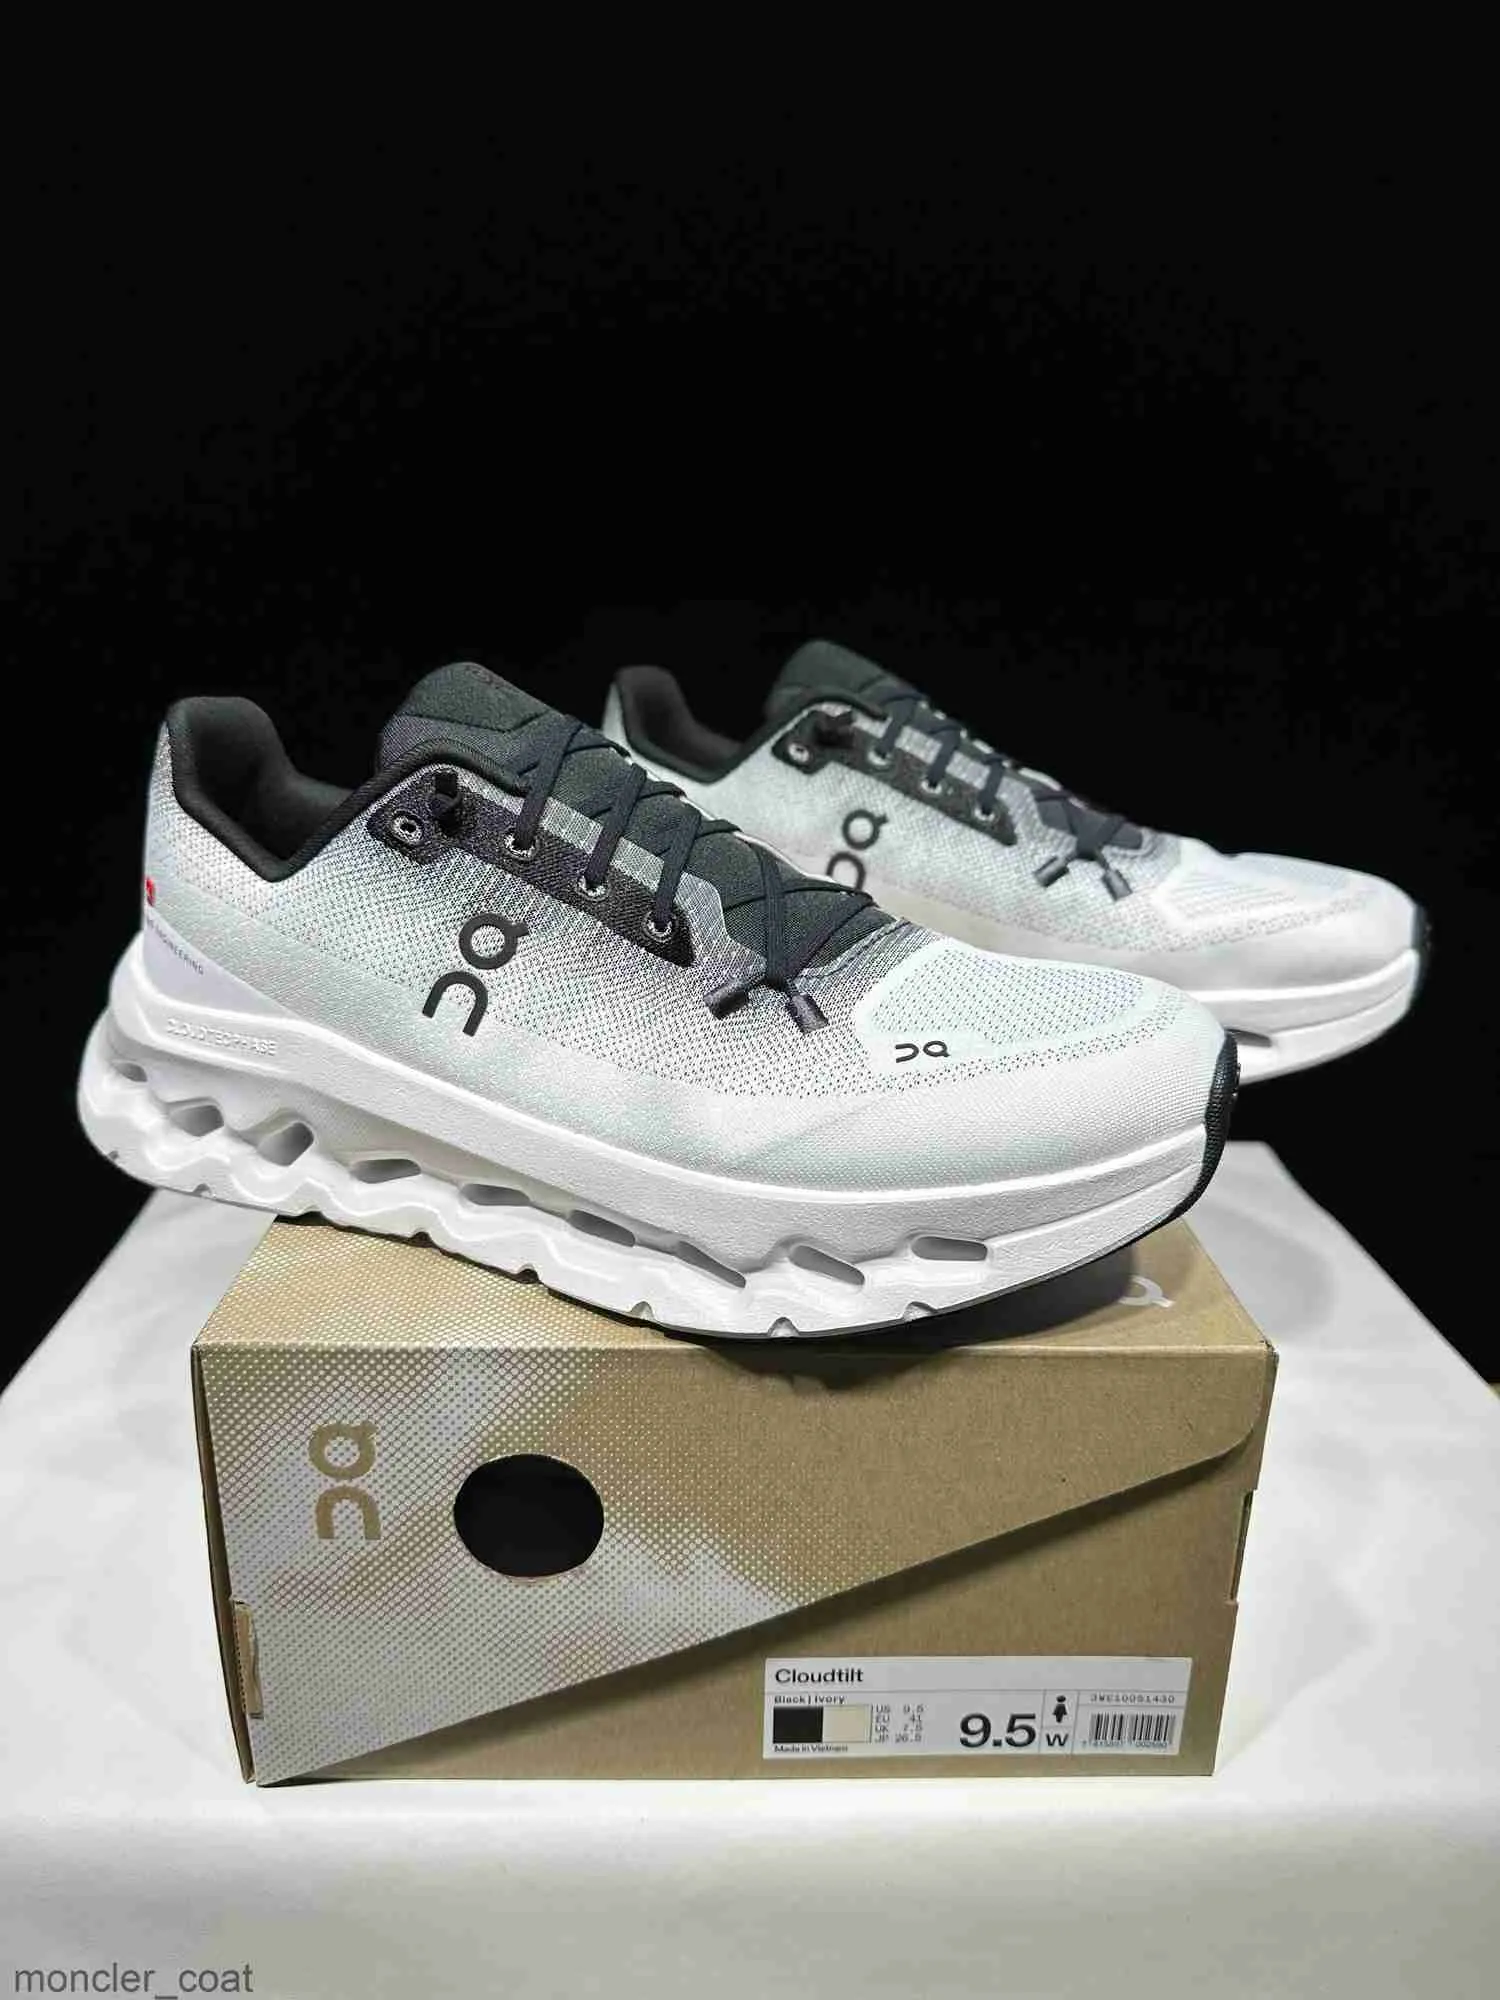 NOWOŚĆ COMING DROGA BUTS COMMERTILT Forever Blue Khaki zielony All White Cloudswift Cloud x 3 SHIRCE SHIRKADALNE Casual Outdoor Lightweight Men Sneakers